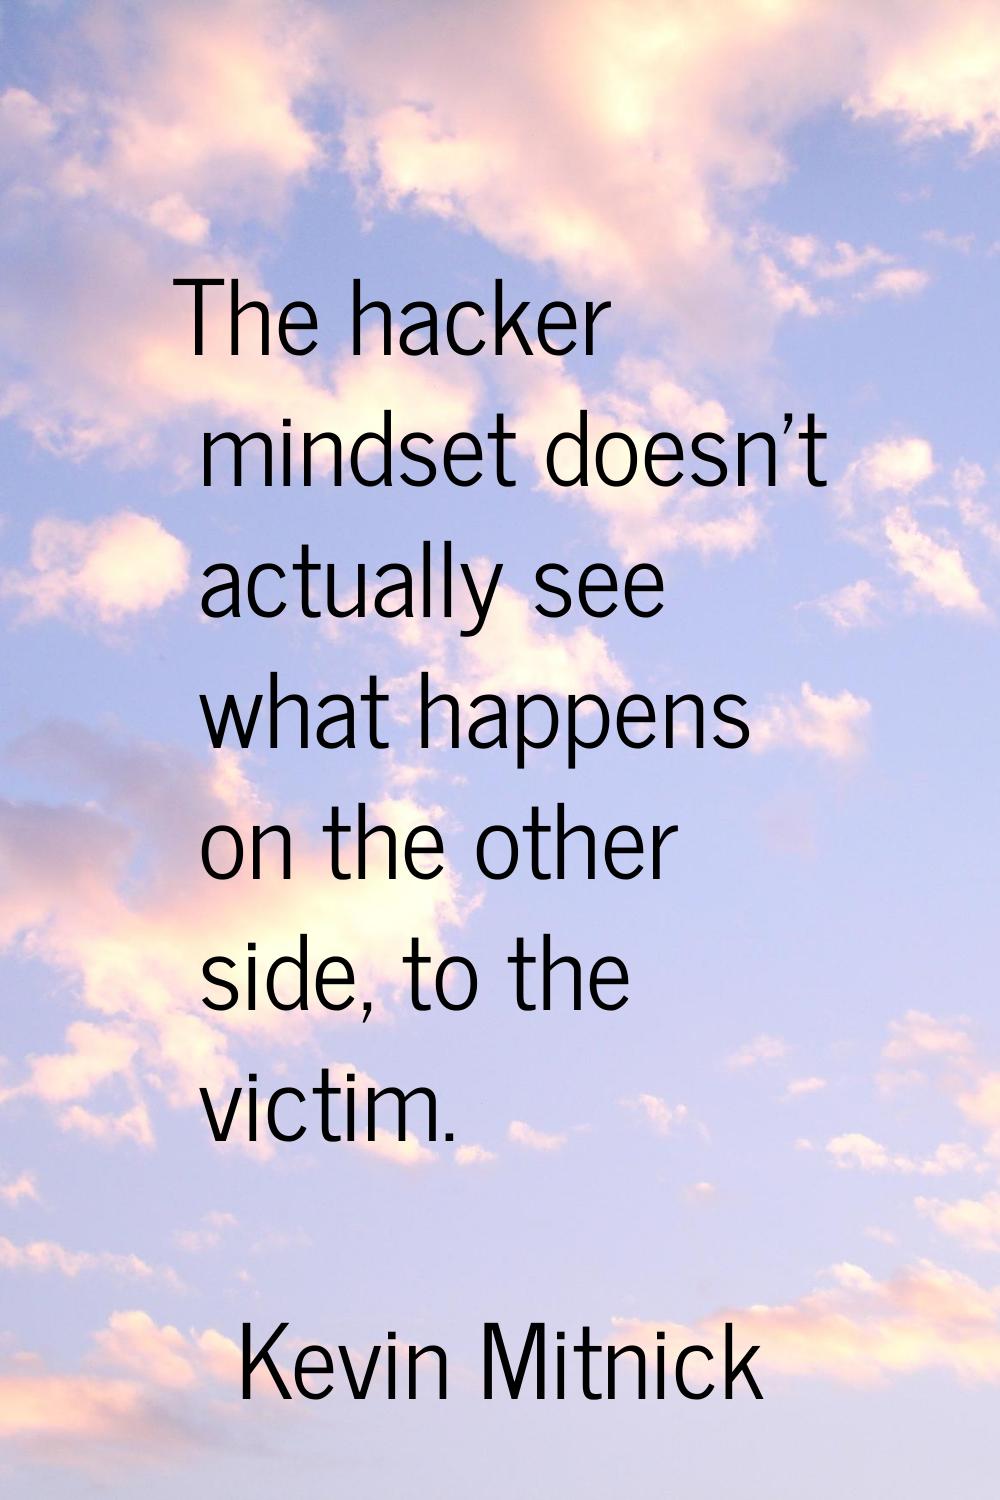 The hacker mindset doesn't actually see what happens on the other side, to the victim.